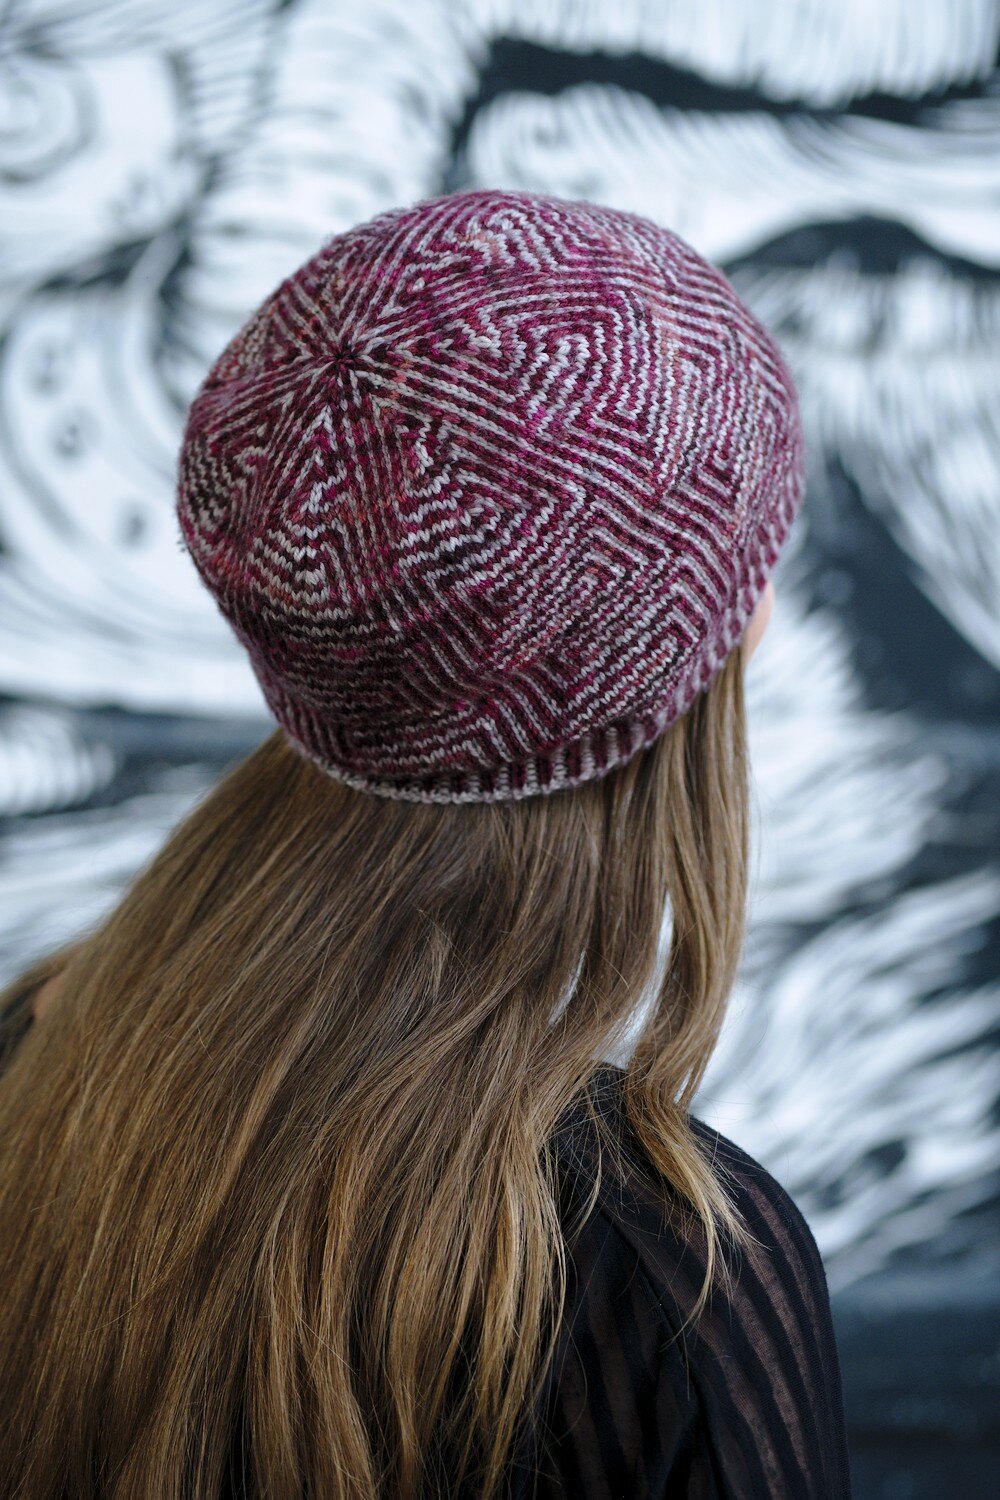 Hermes stranded colourwork Hat knitting pattern for 4ply weight yarn